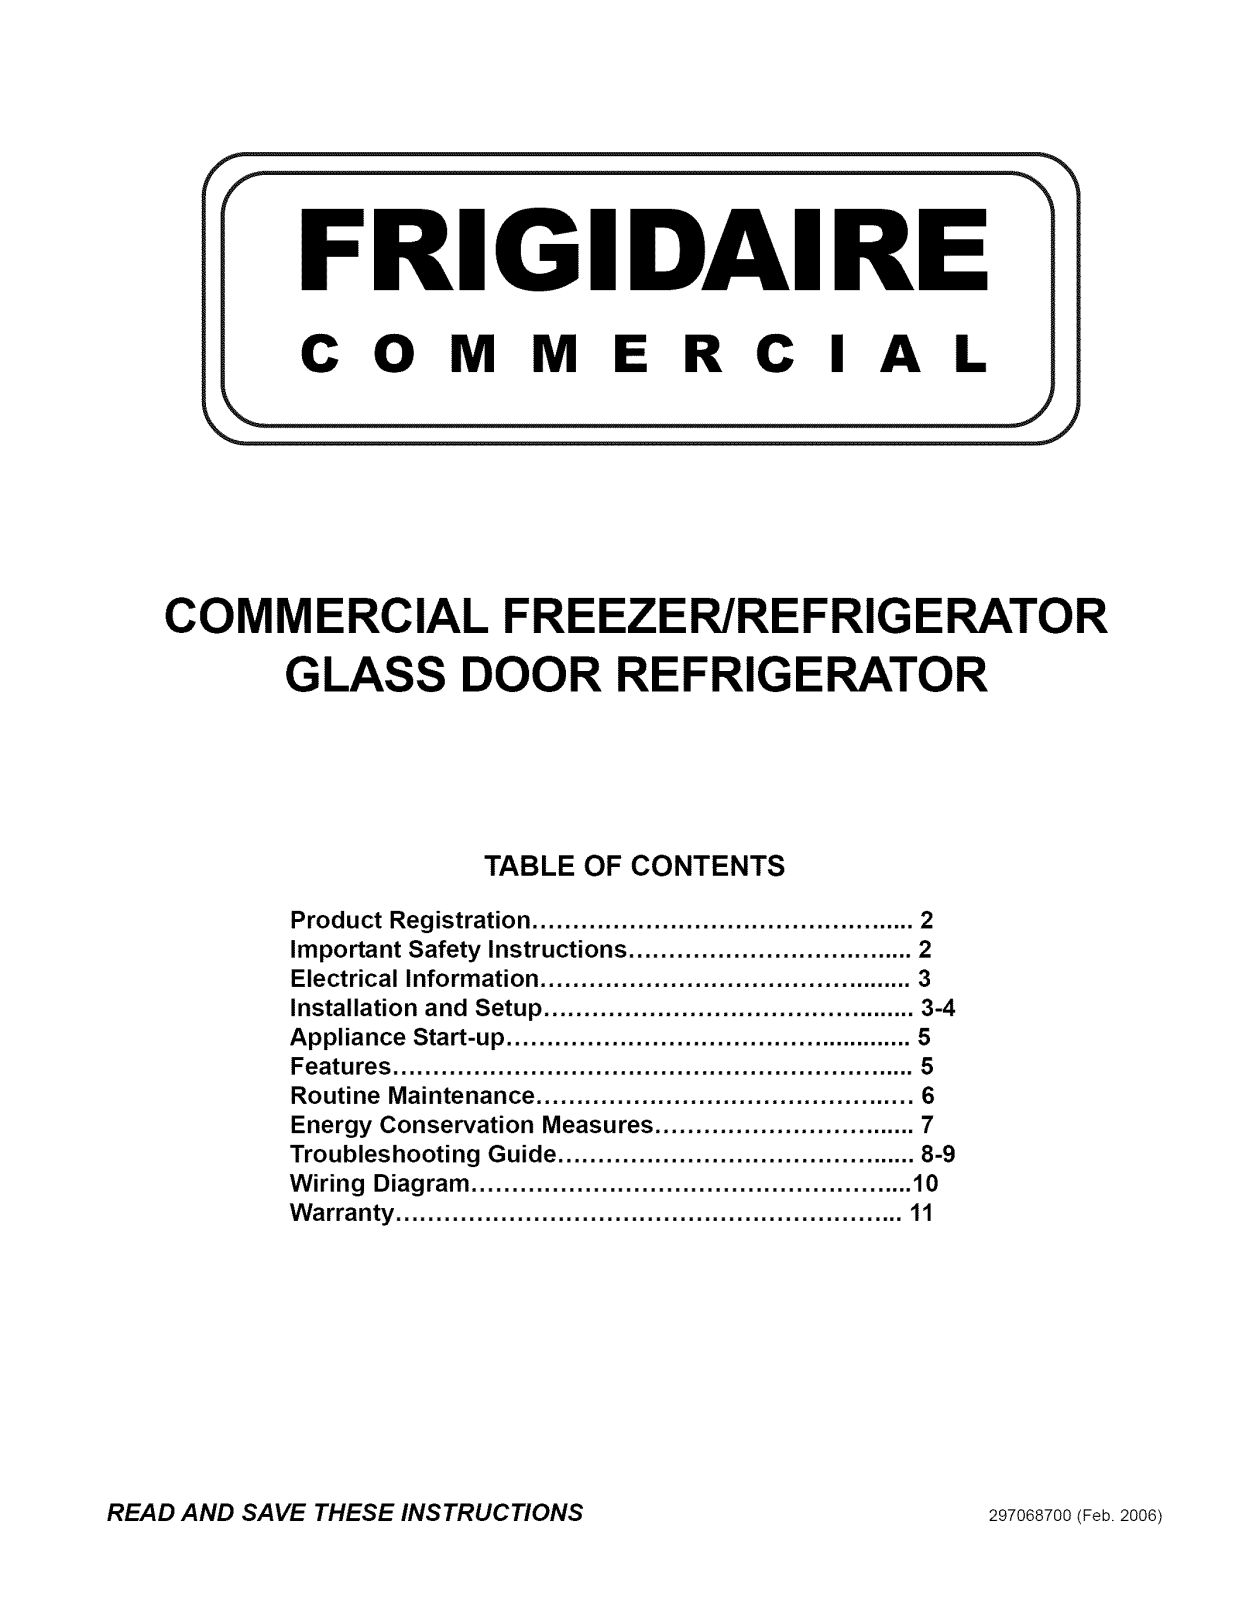 Frigidaire FCRS201RFW0, FCRS201RFB2, FCRS201RFB0, FCRS201LFW0, FCRS201LFB0 Owner’s Manual